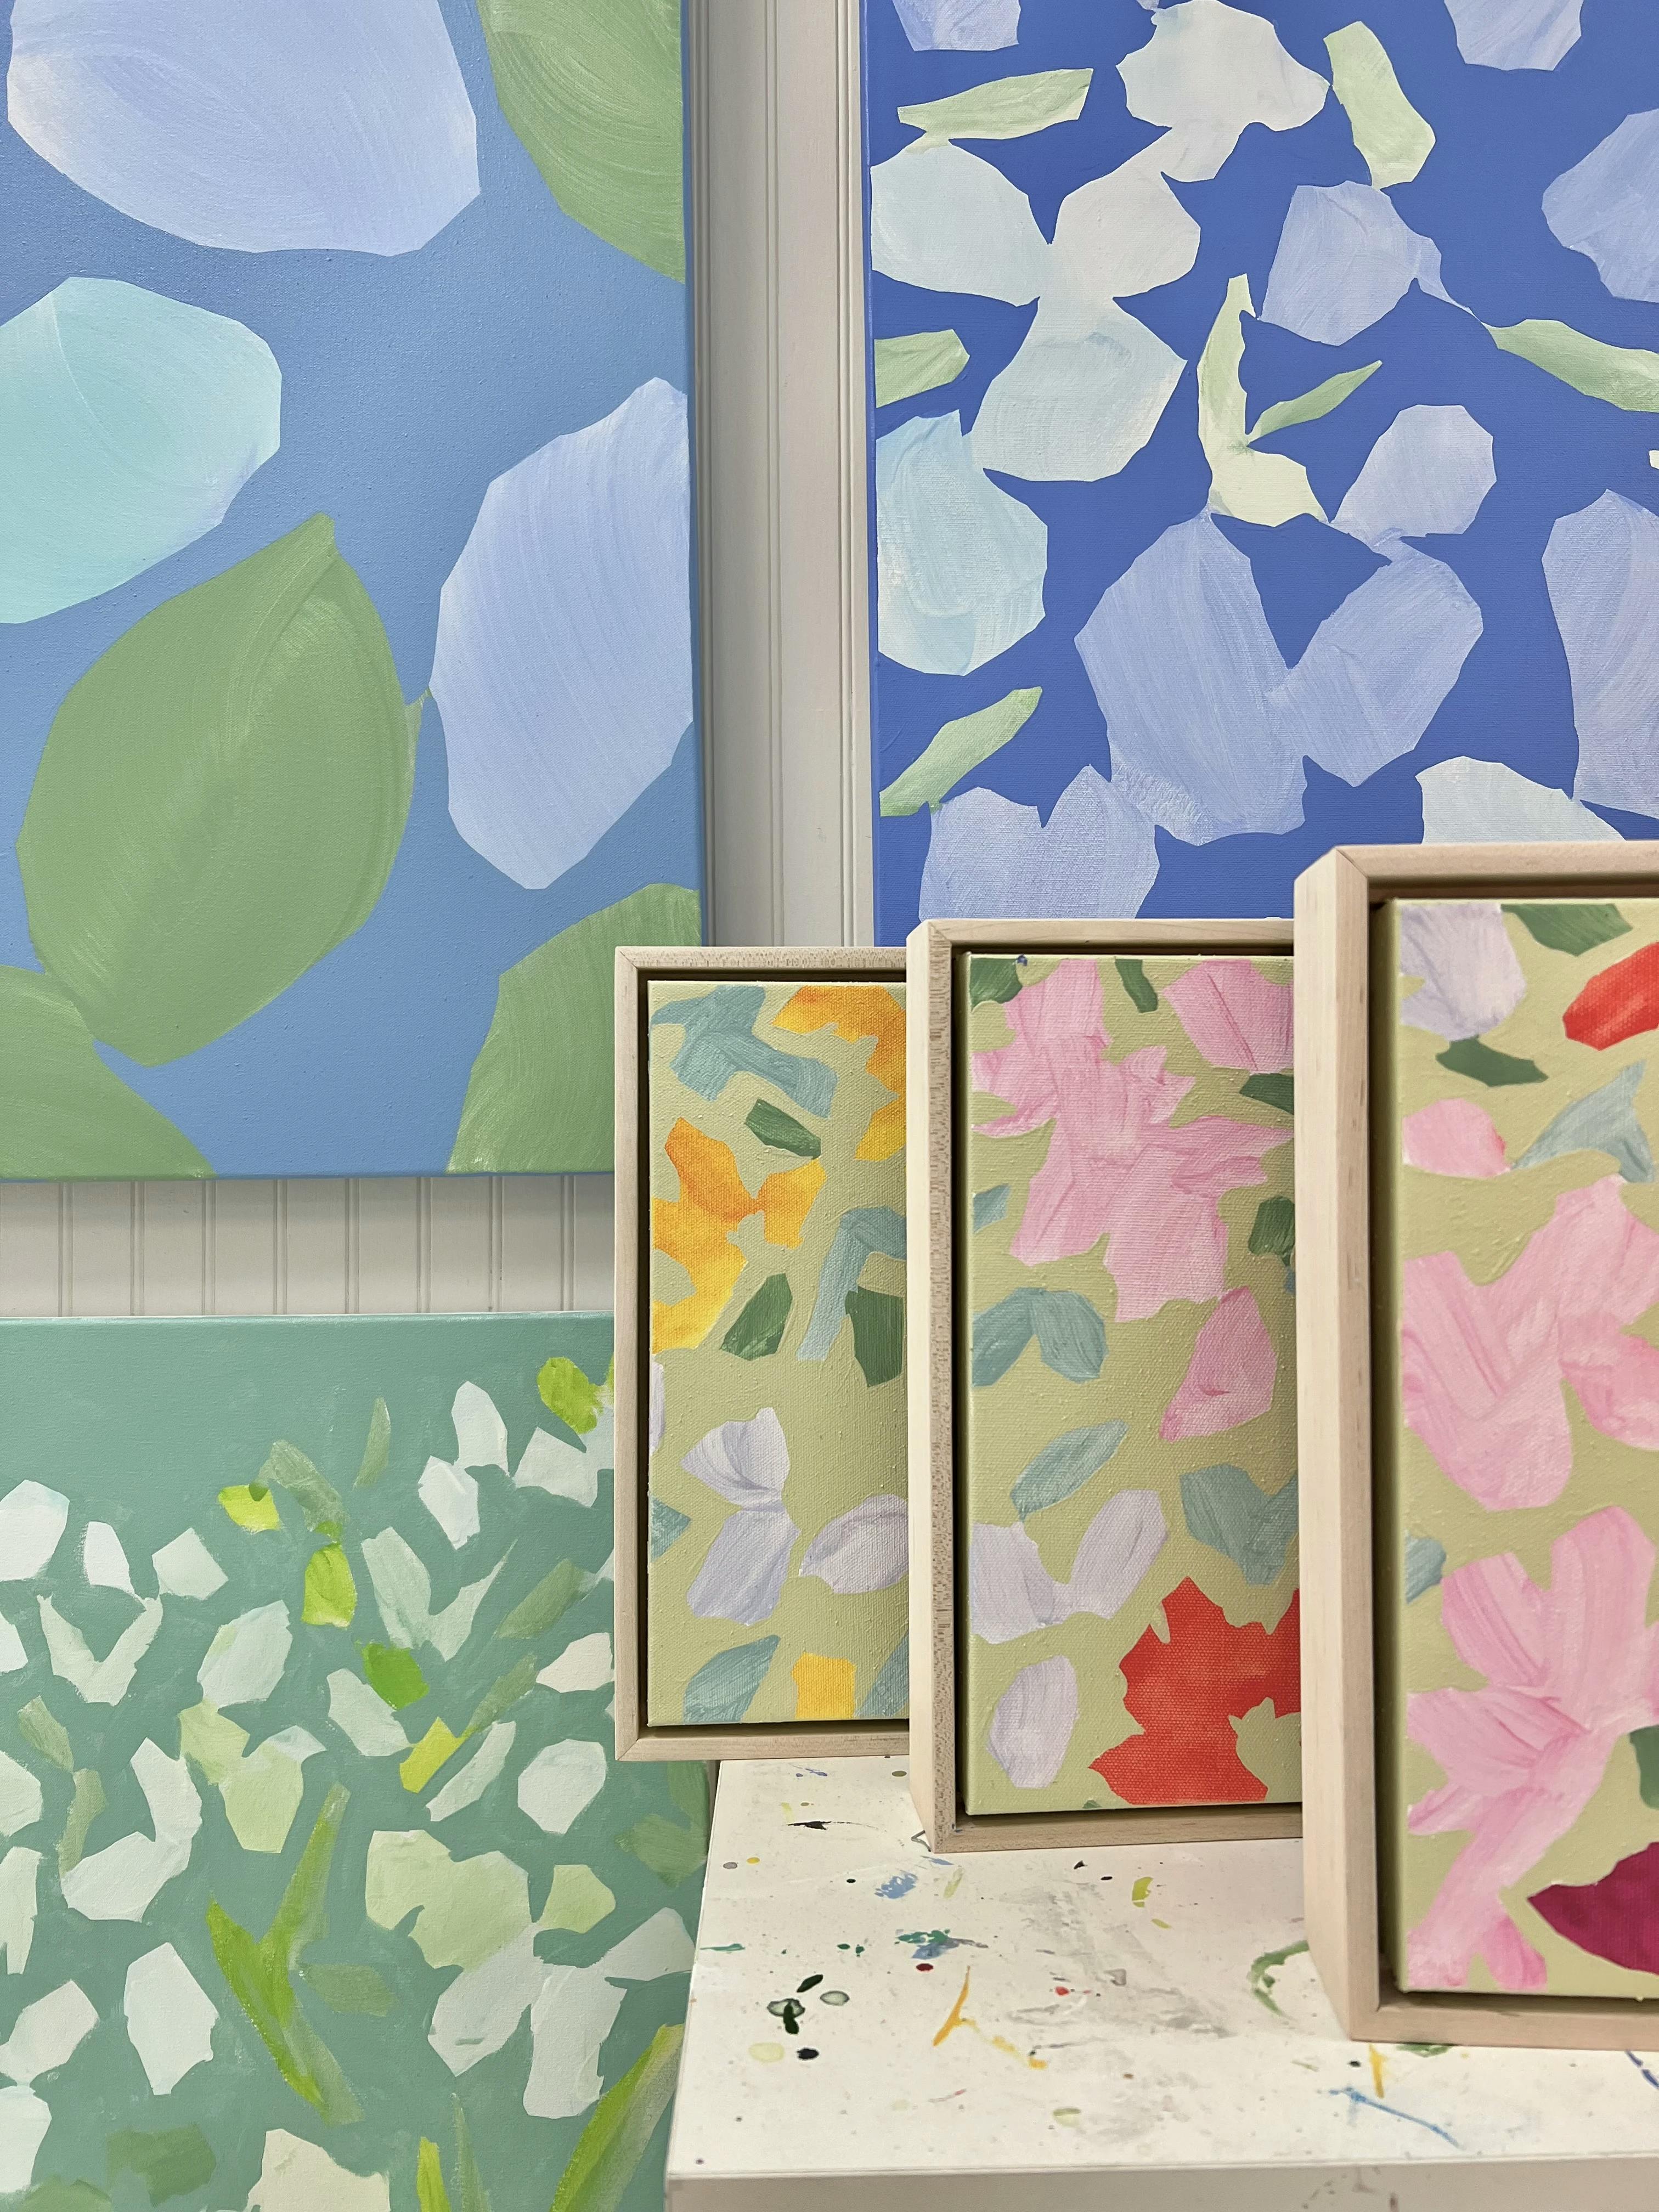 A close-up of different sized paintings with colorful, fragmented flowers by artist Kit Porter.